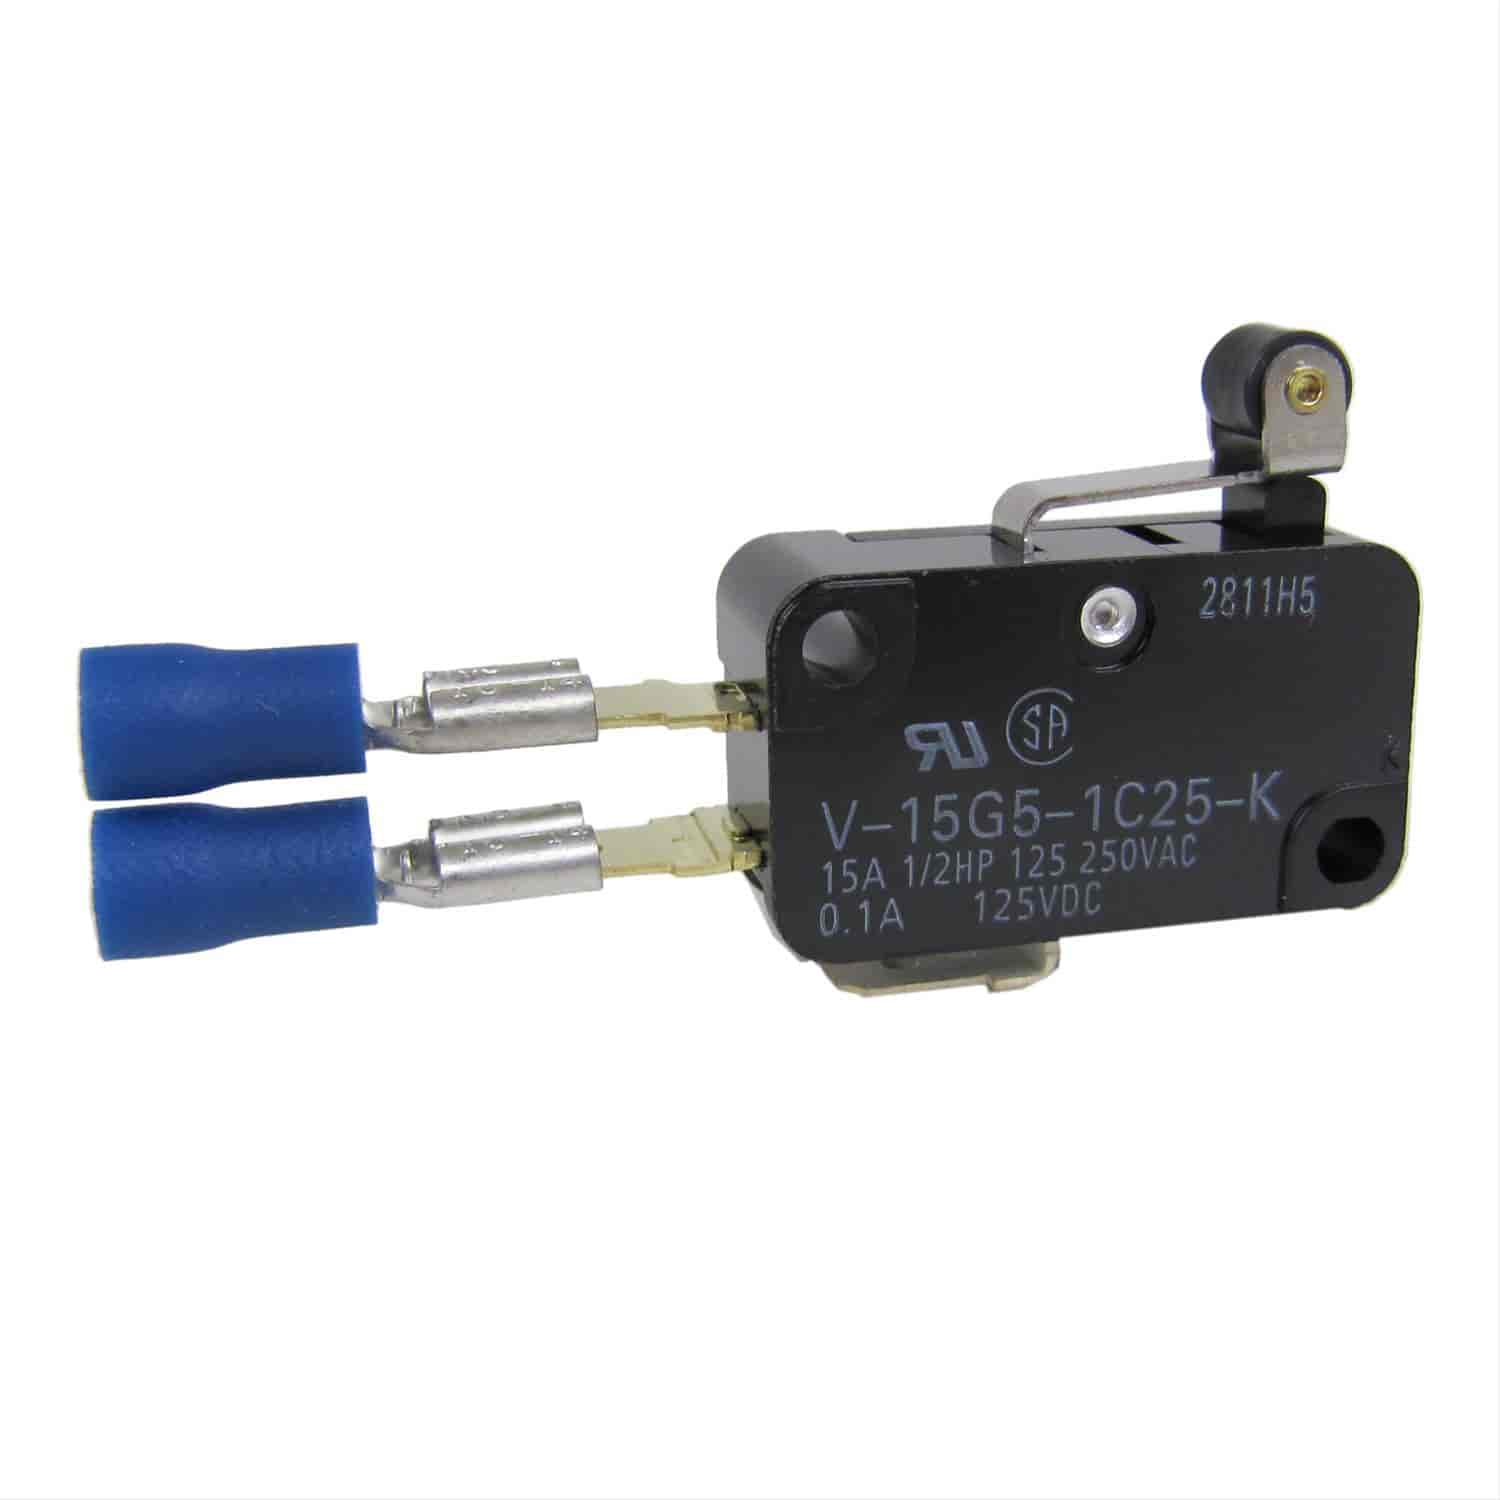 Replacement Neutral Reverse Micro Switch For Use With 130-80797, 130-80798, 130-80855 and 130-81050 Automatic Shifters